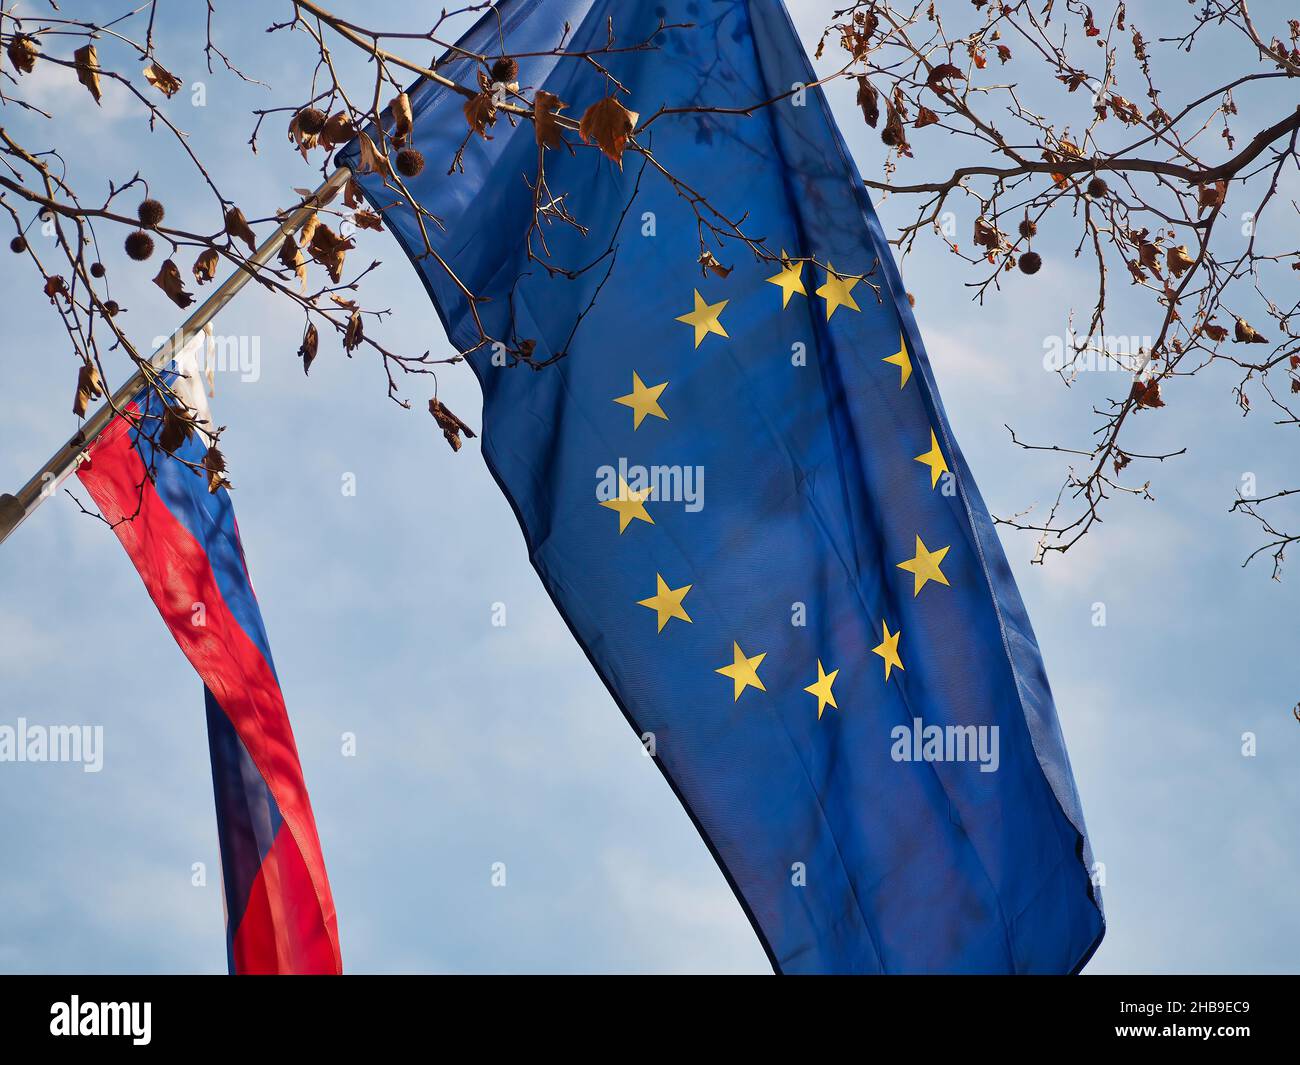 EU flag and the flag of Slovenia in the air Stock Photo